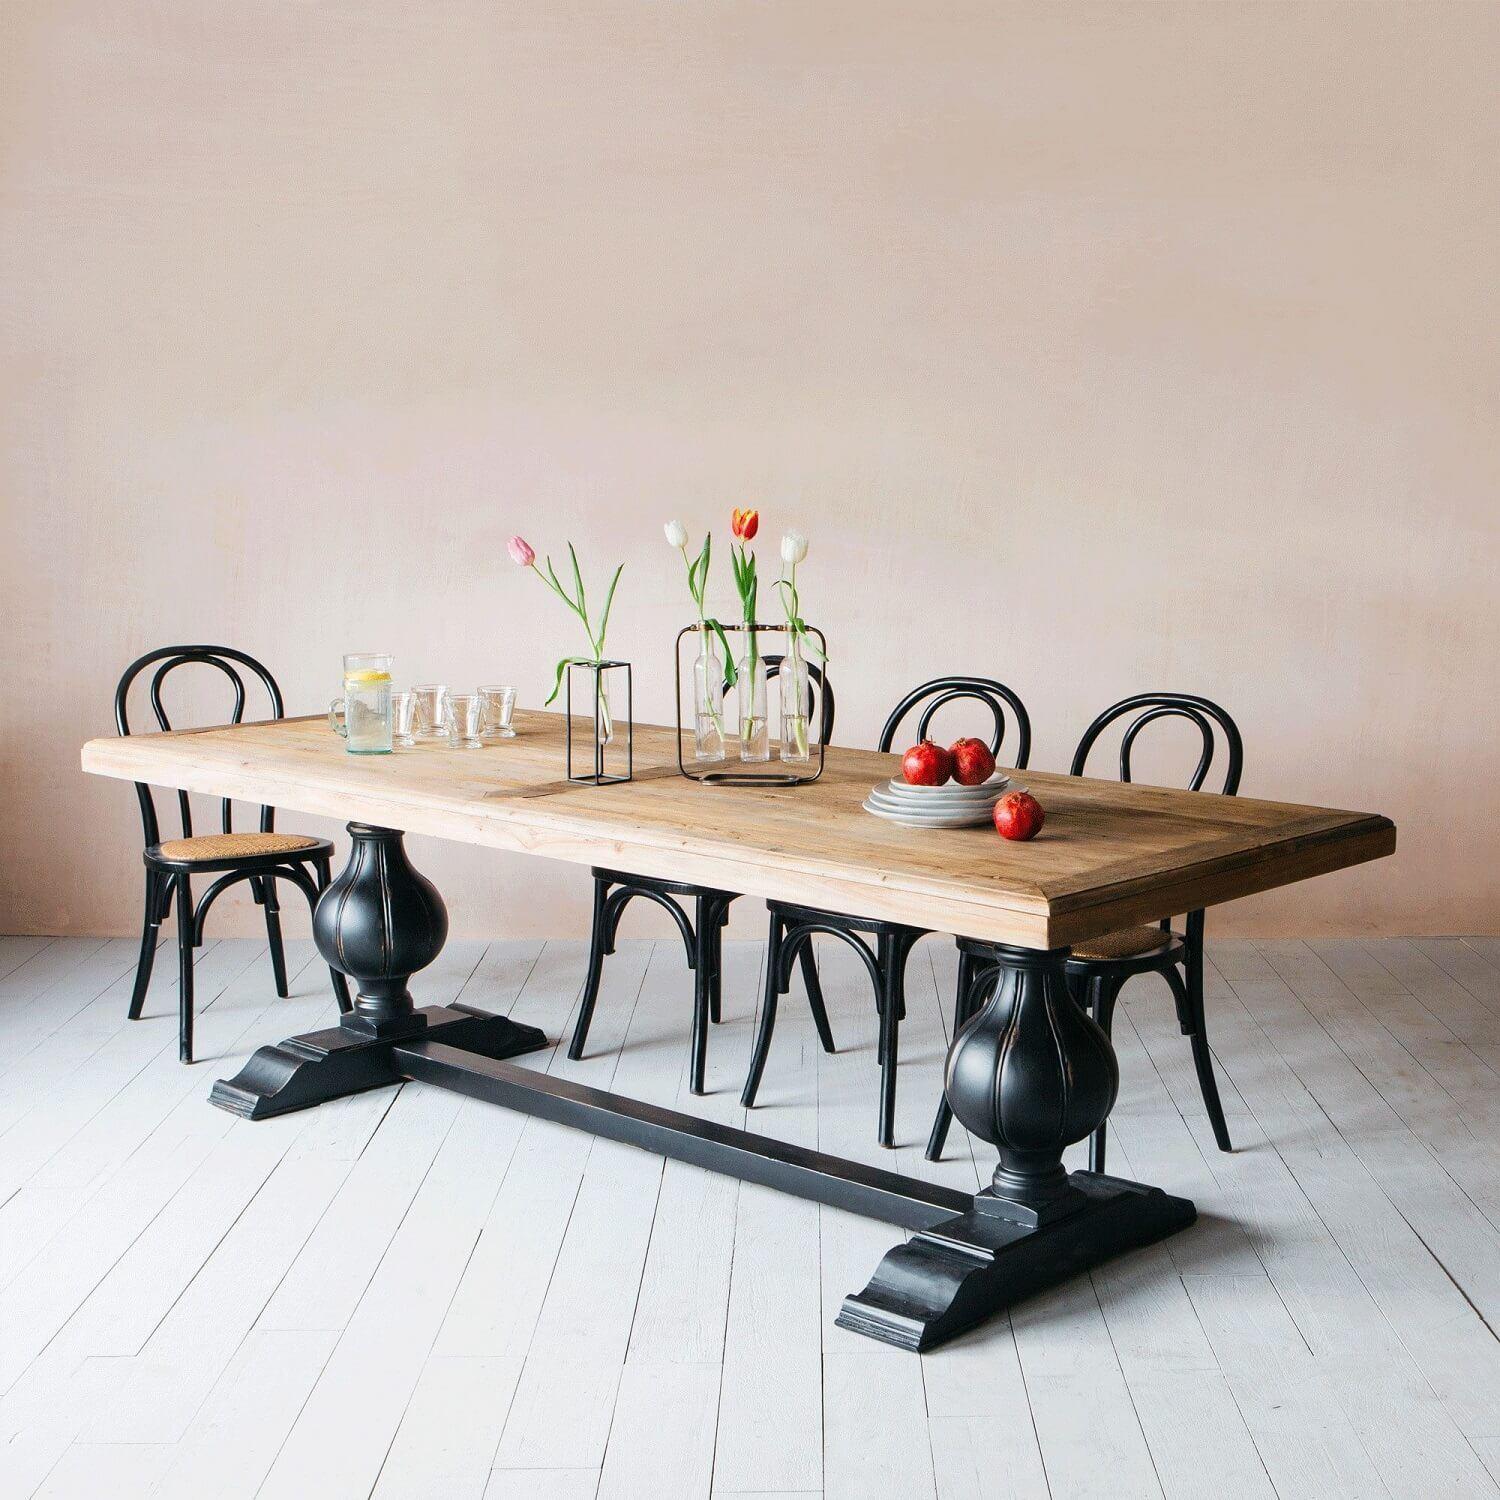 Bruel eight-seater dining table in mango wood with a rustic look.